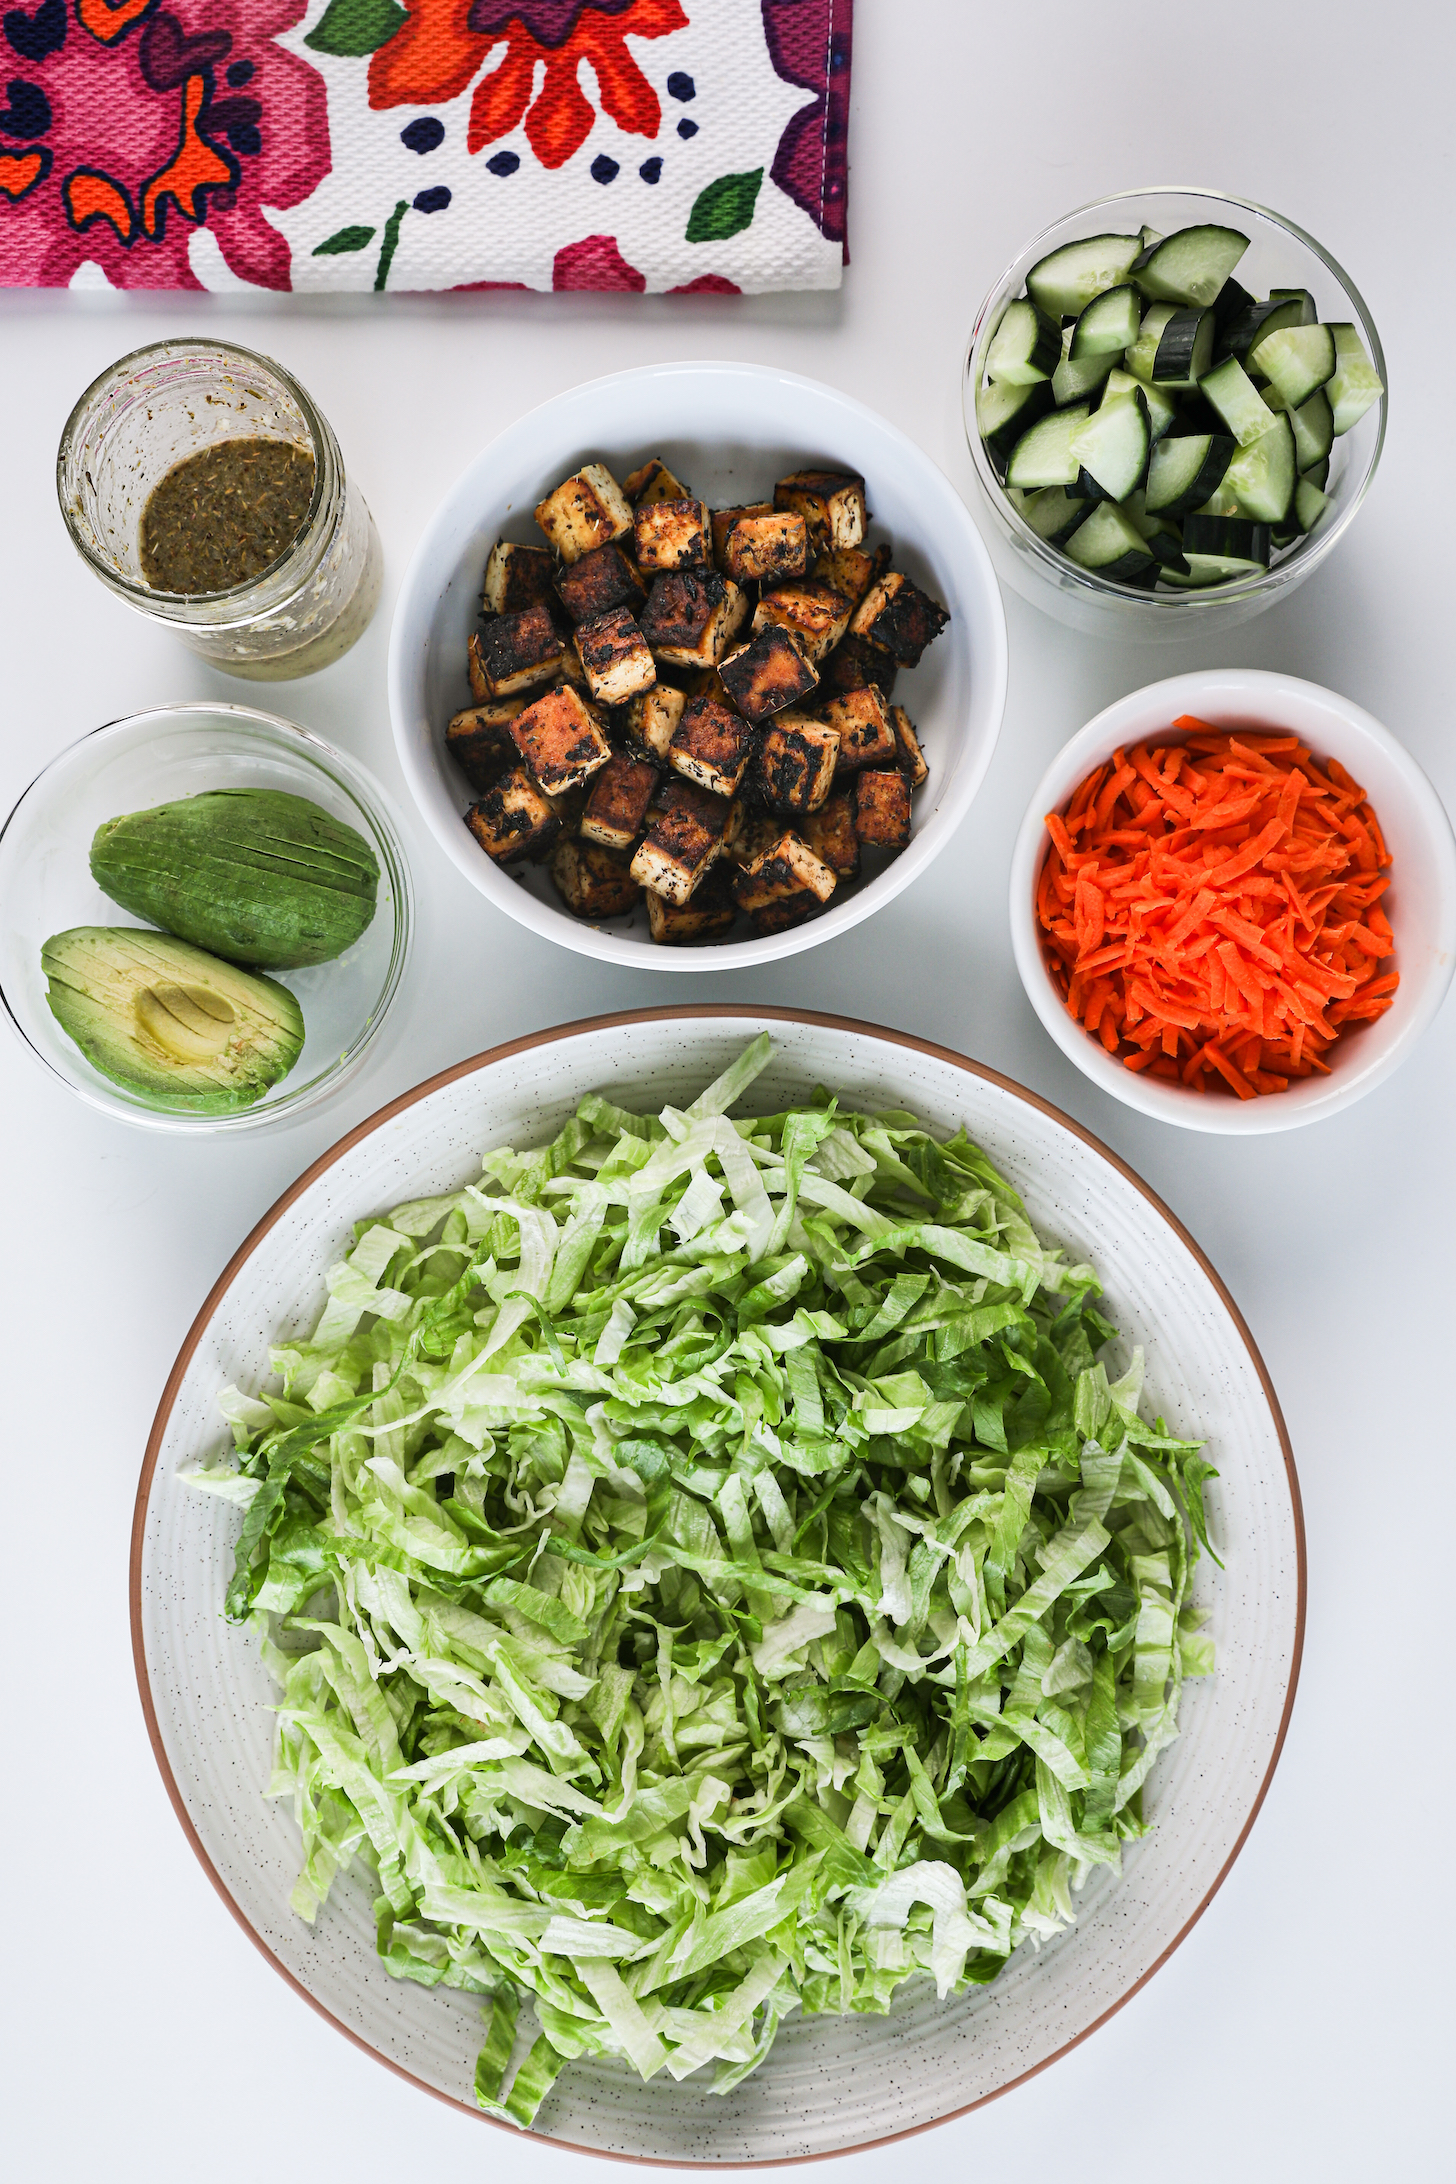 A selection of ingredients featuring a large plate of shredded iceberg lettuce, grated carrot, crispy tofu cubes, cucumber cubes, avocado slices, and salad dressing.